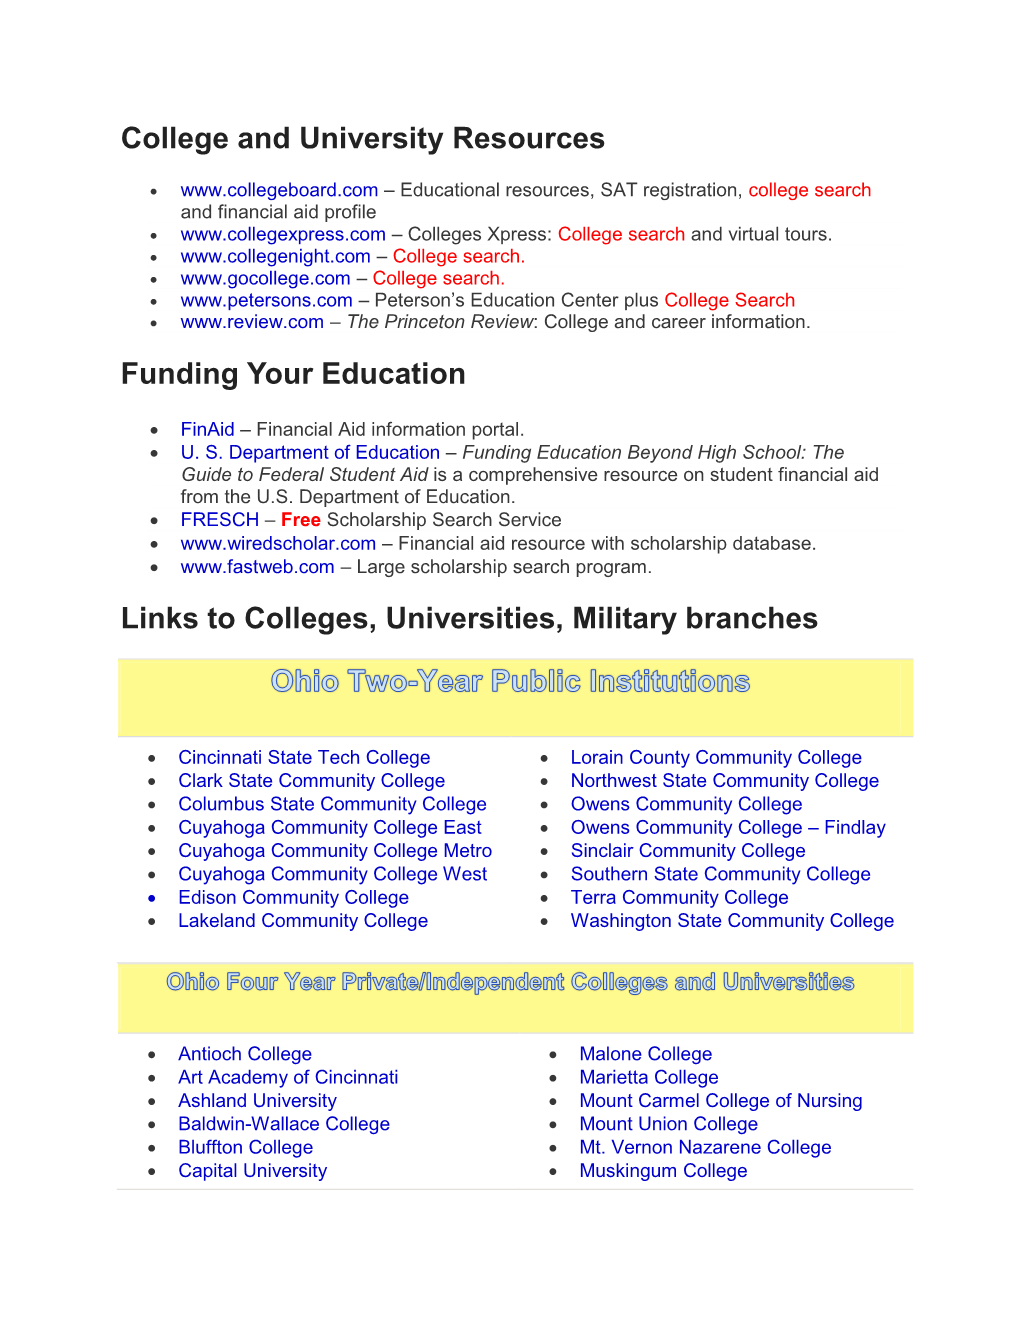 College and University Resources